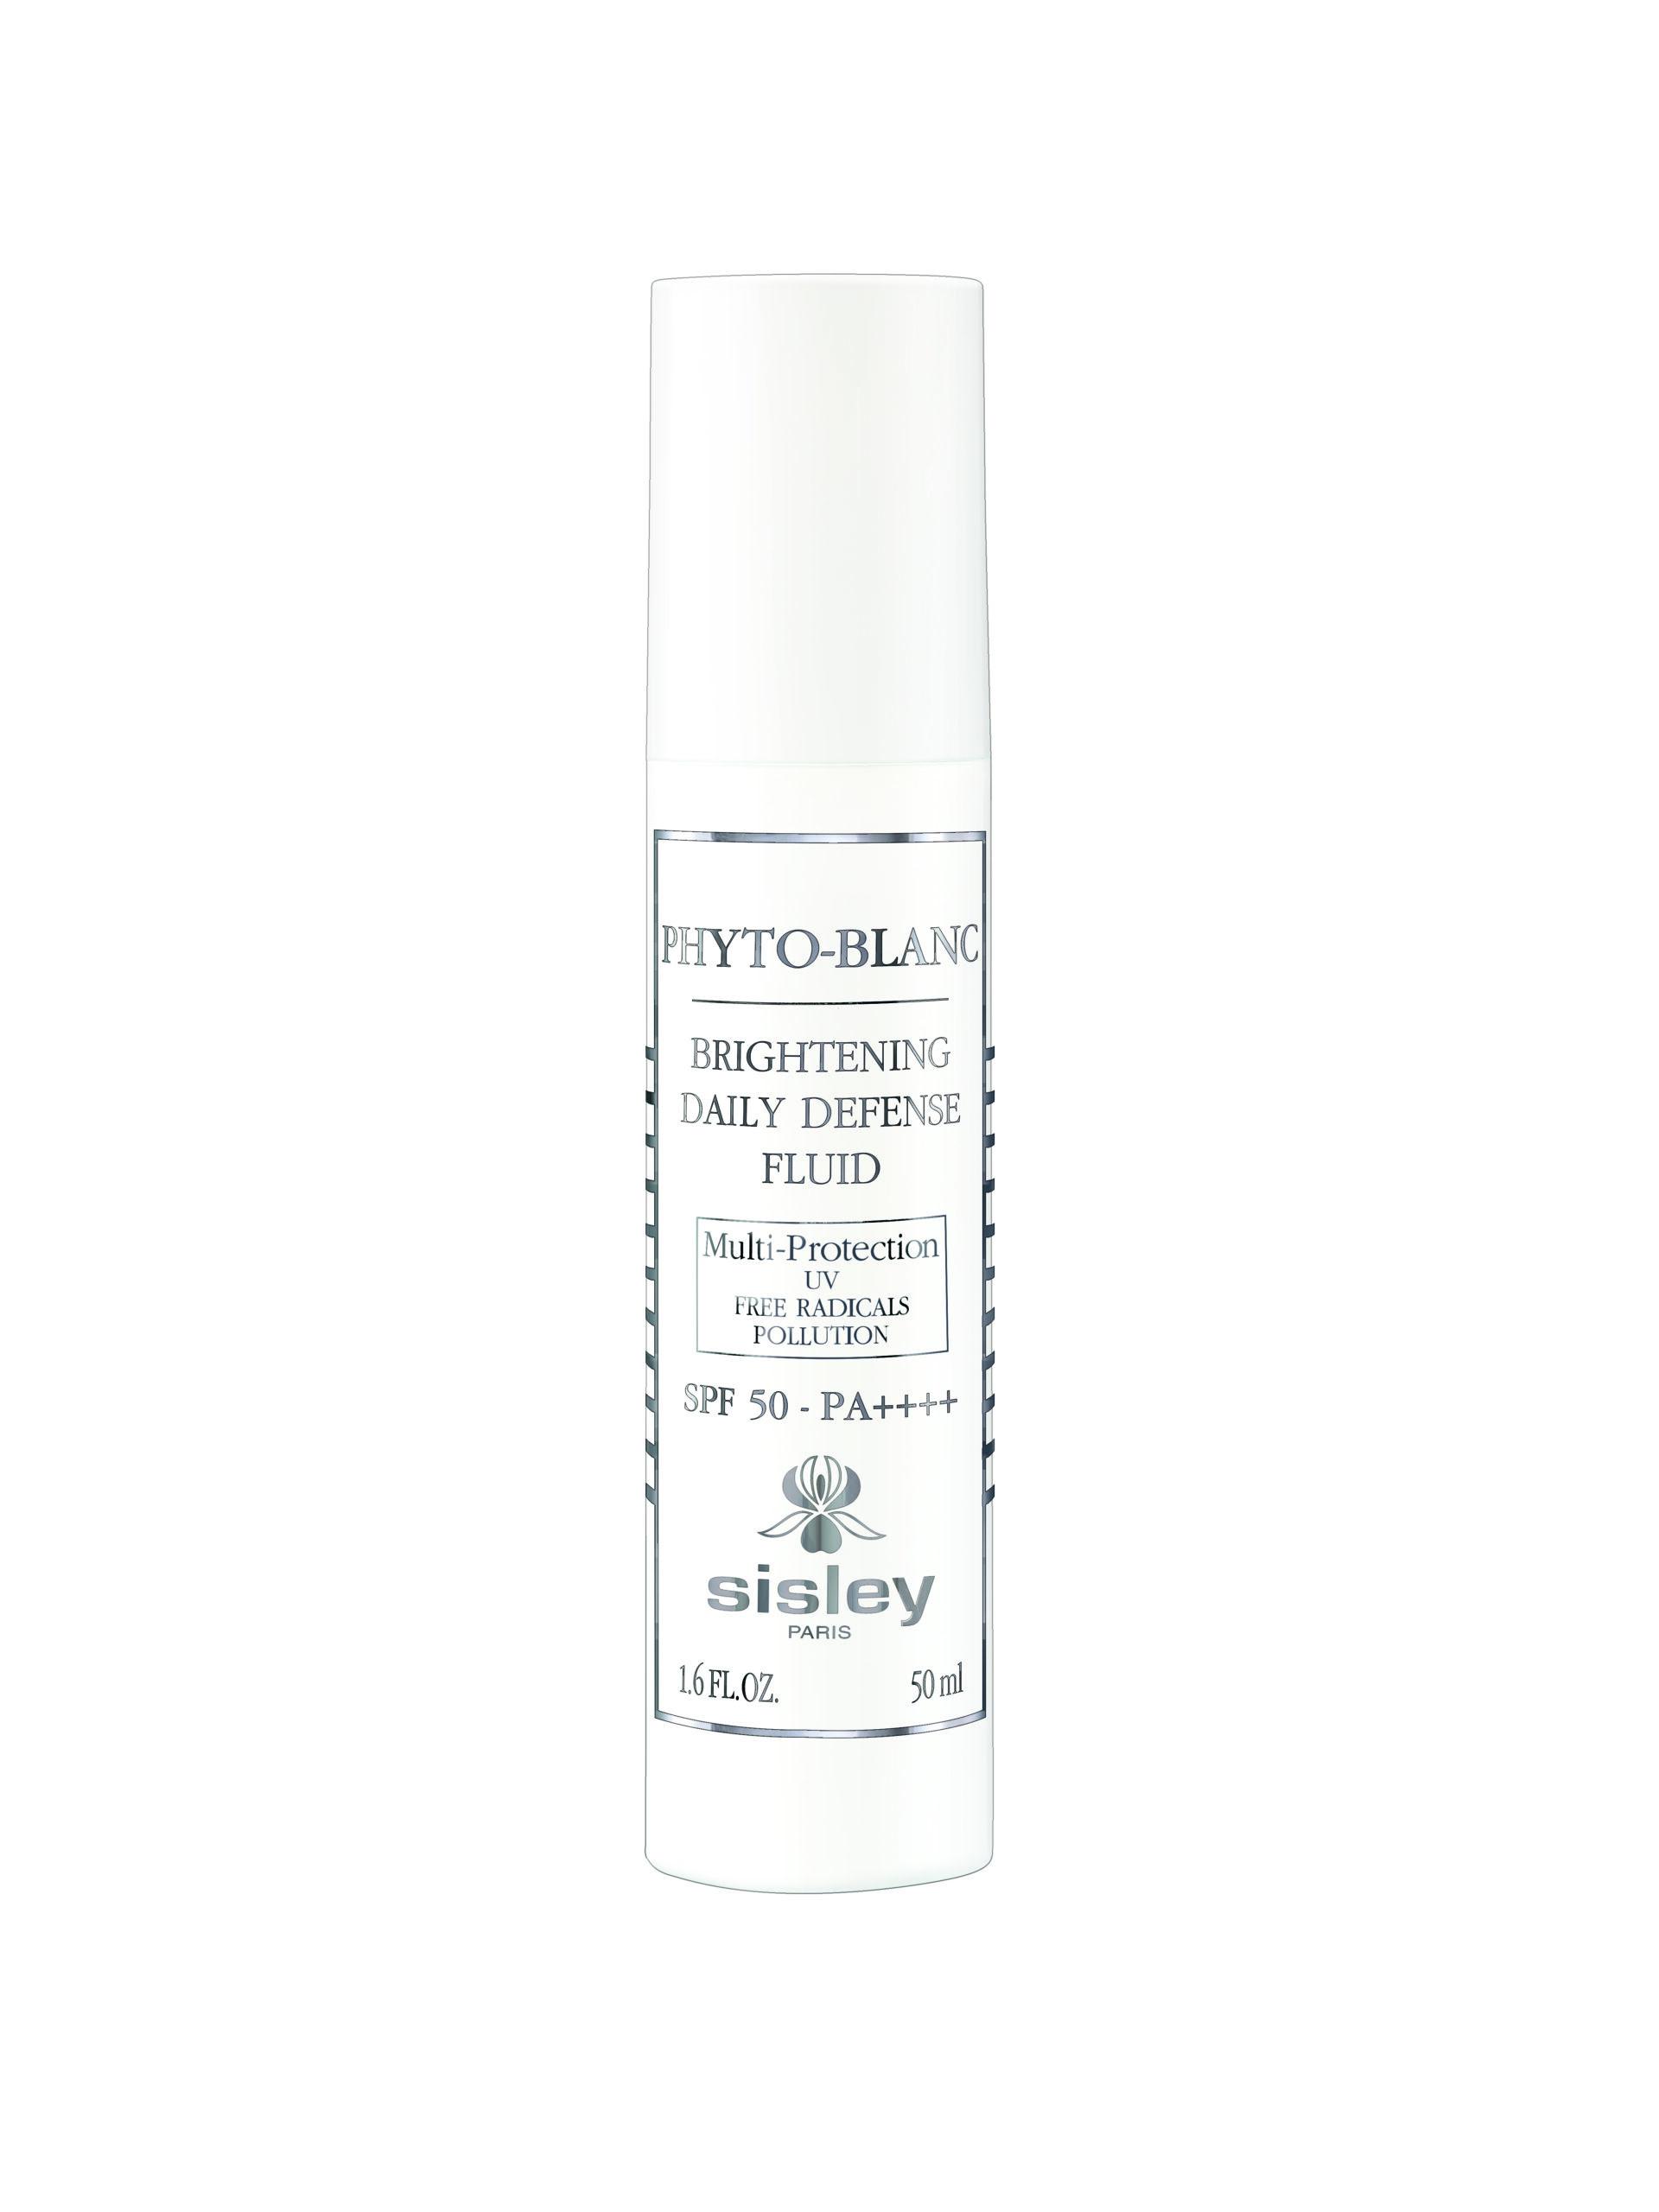 Phyto-Blanc Brightening Daily Defense Fluid: designed to be applied to face and neck morning and night as the last step in the skincare routine before make-up 